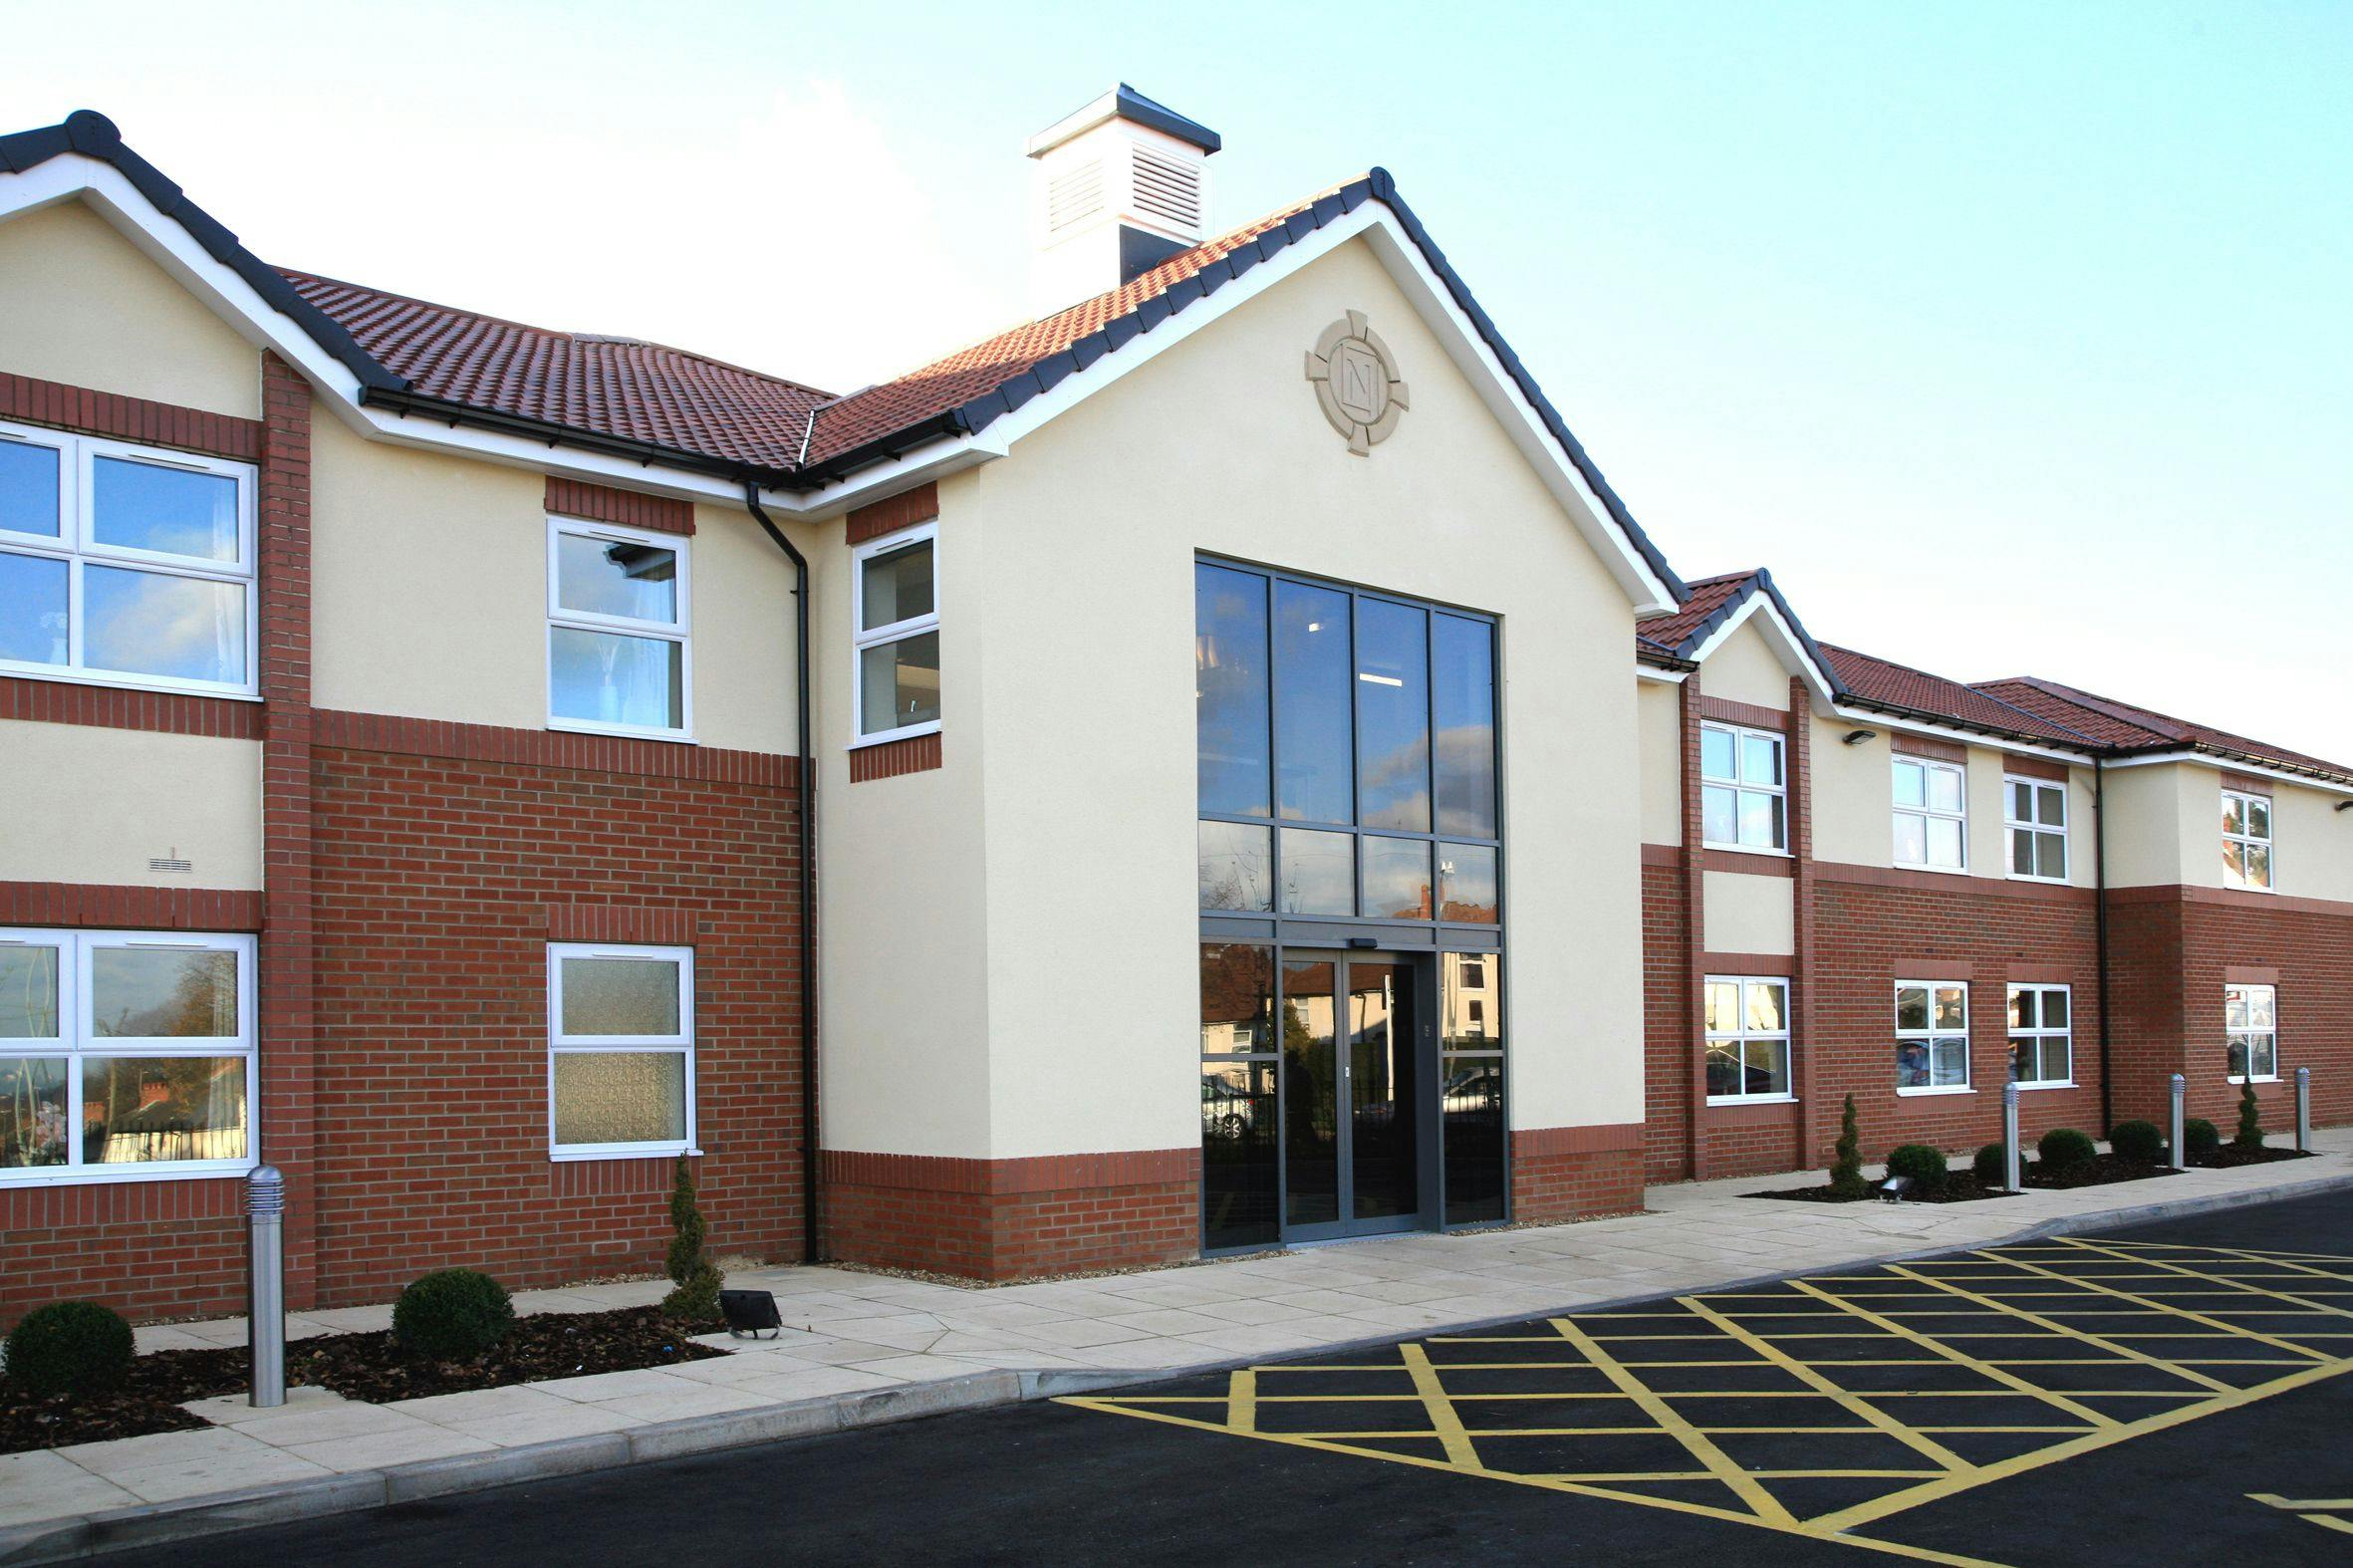 Exterior at The Beeches Residential Care Home, Northfield, Birmingham